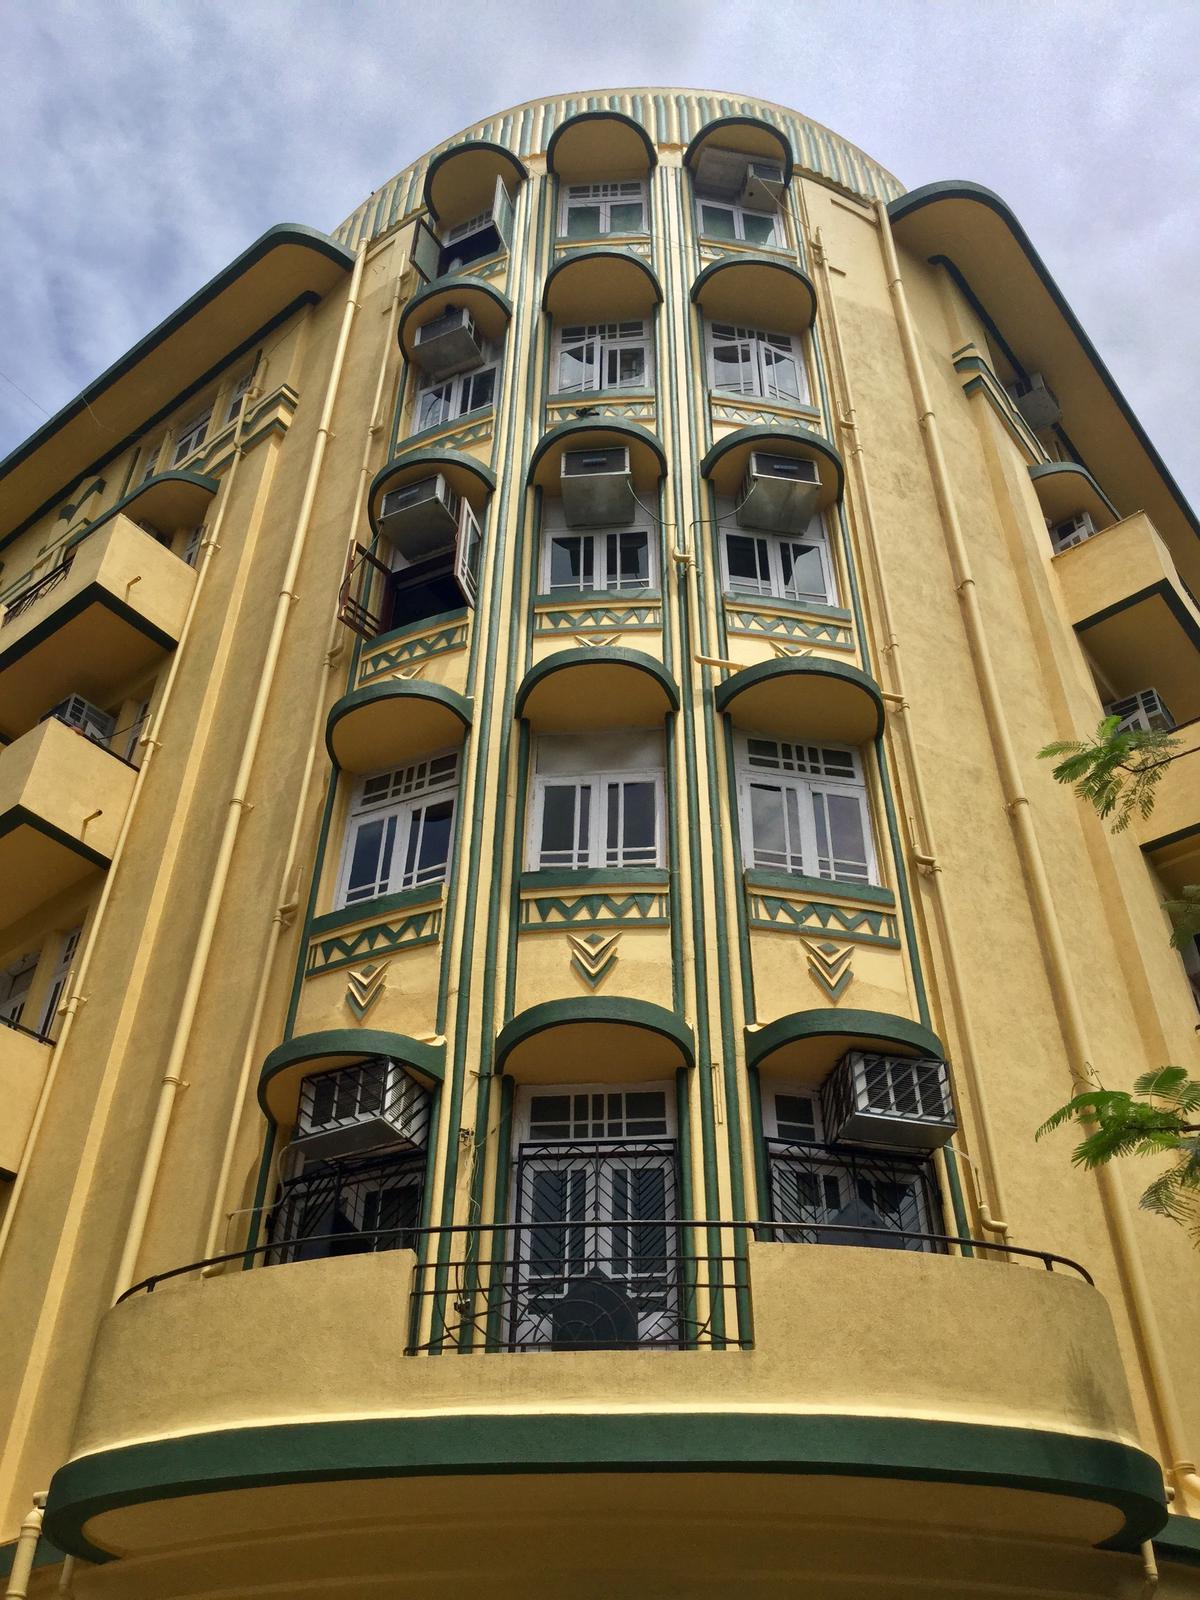 Shiv Shanti Bhuvan built in 1930s is an Art Deco apartment building situated on Maharshi Karve Road along Oval Maidan.